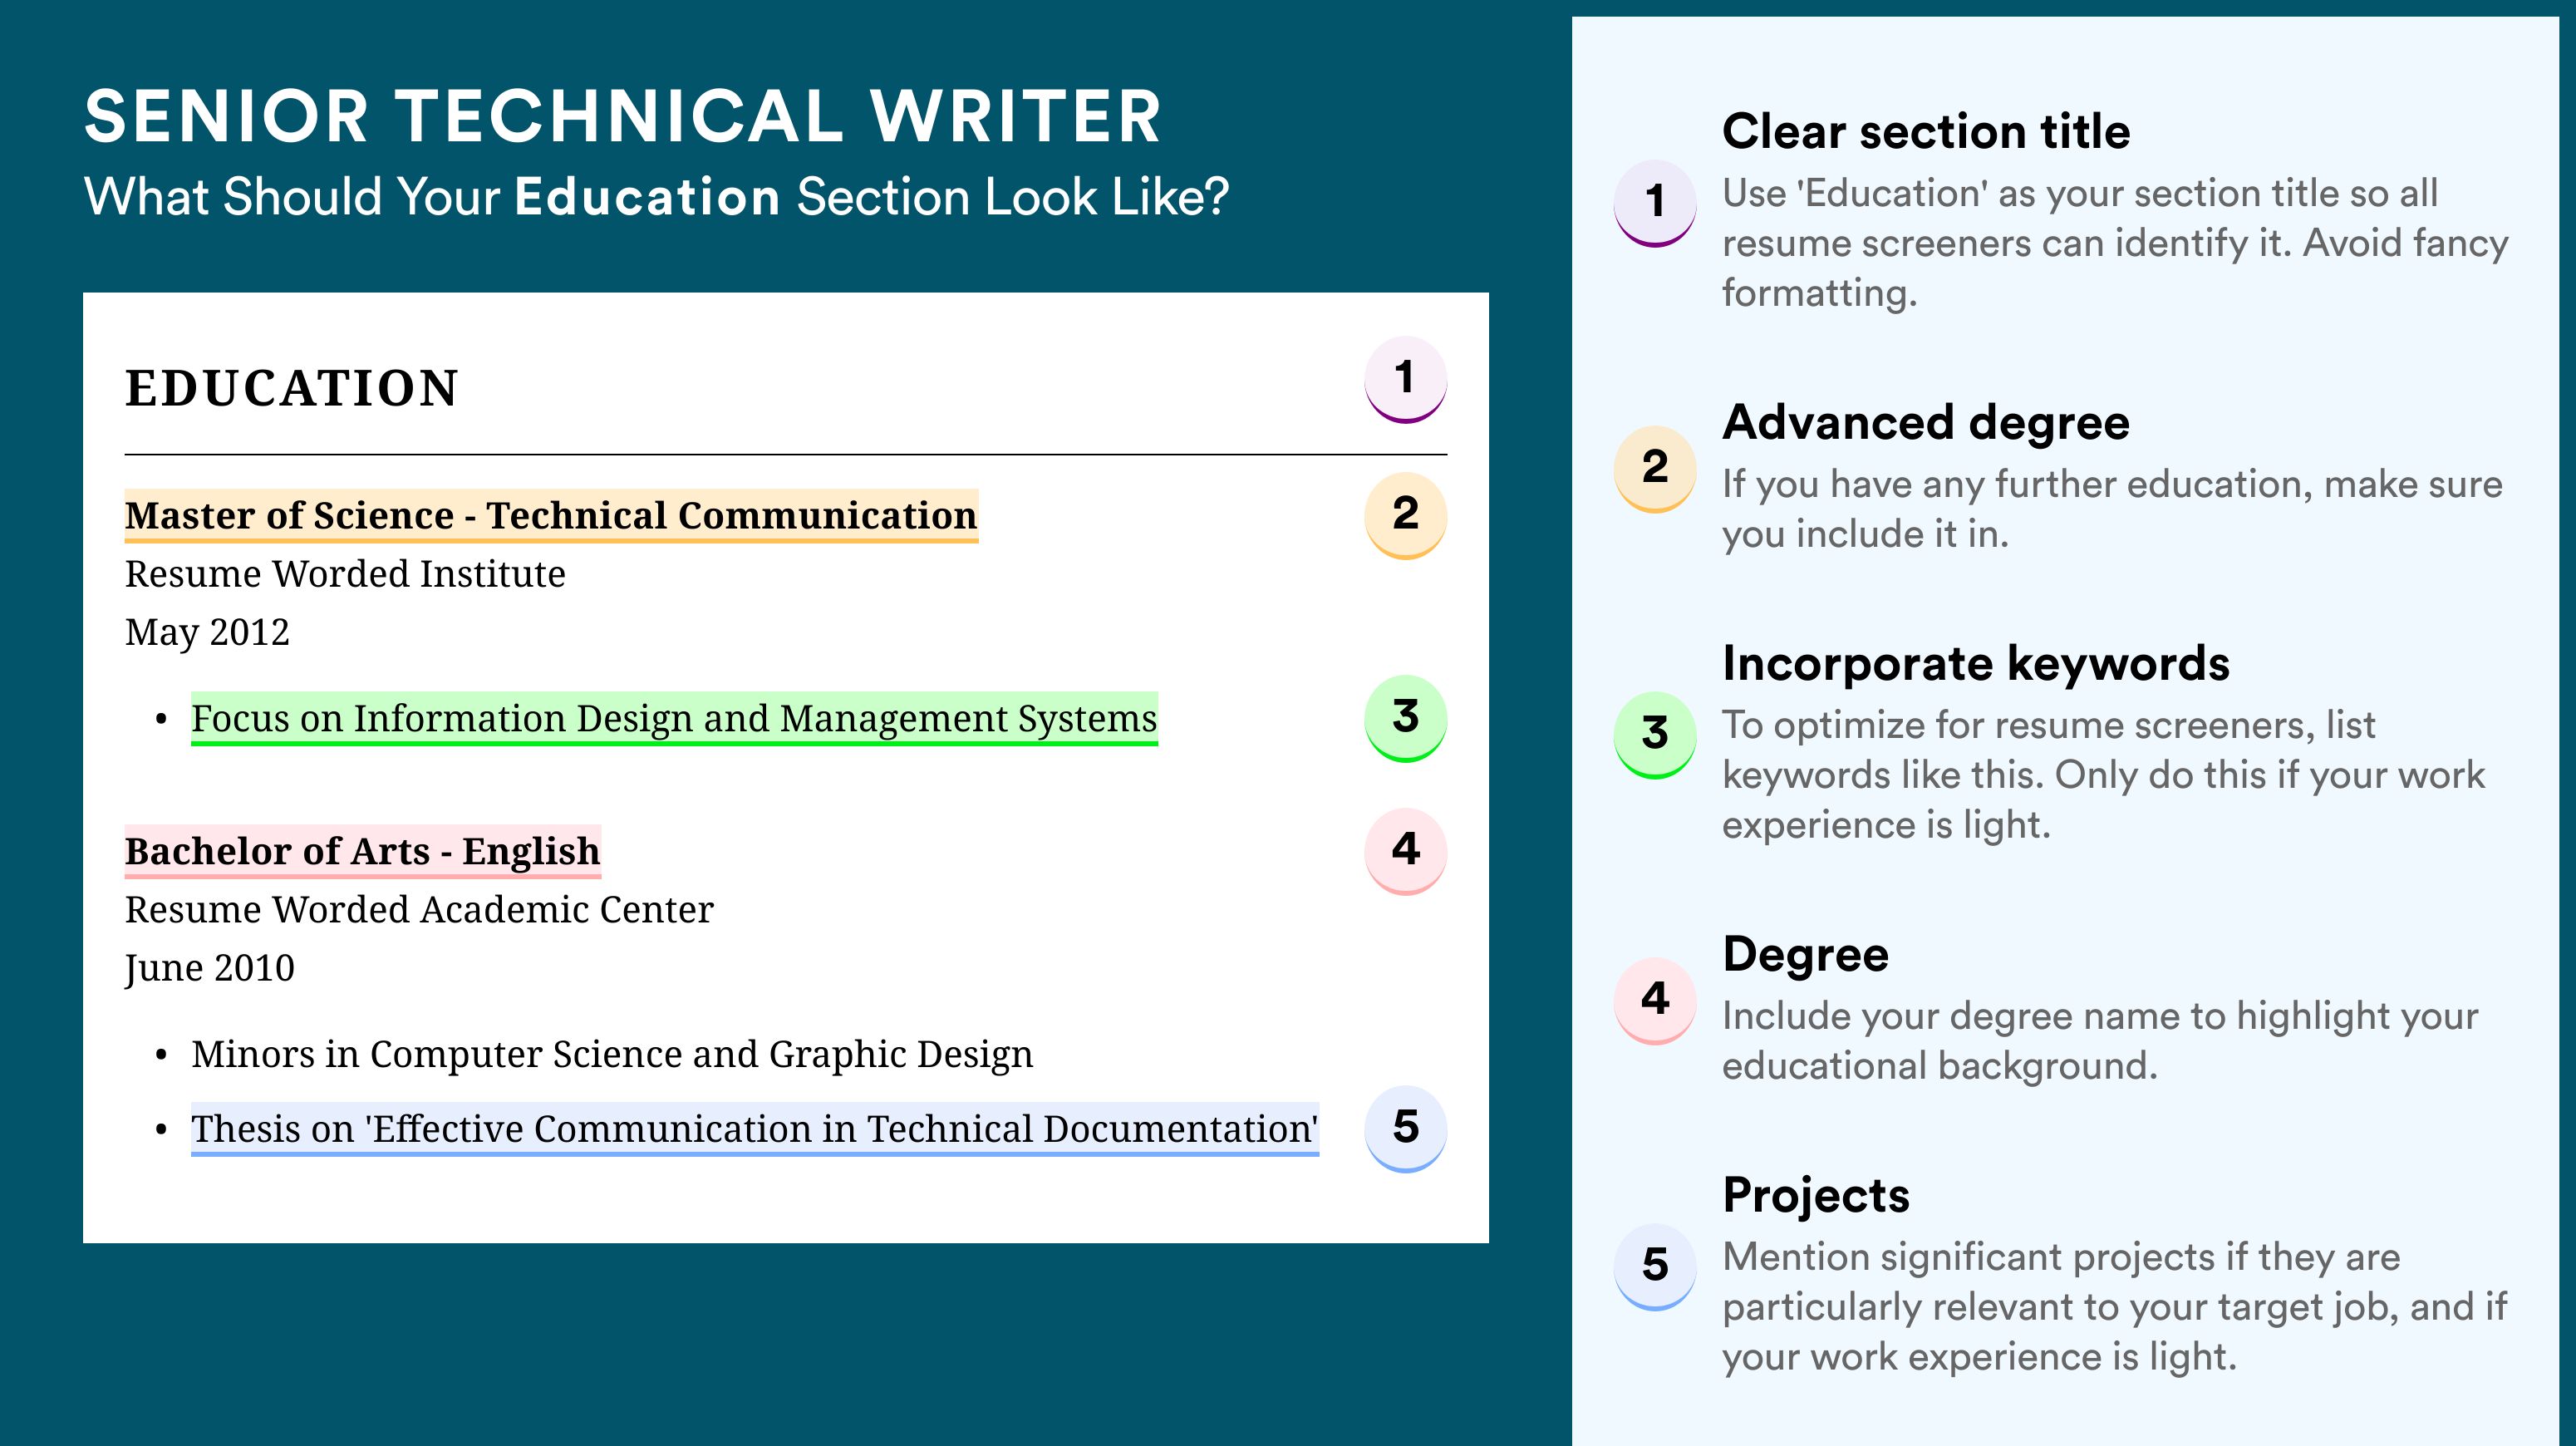 How To Write An Education Section - Senior Technical Writer Roles